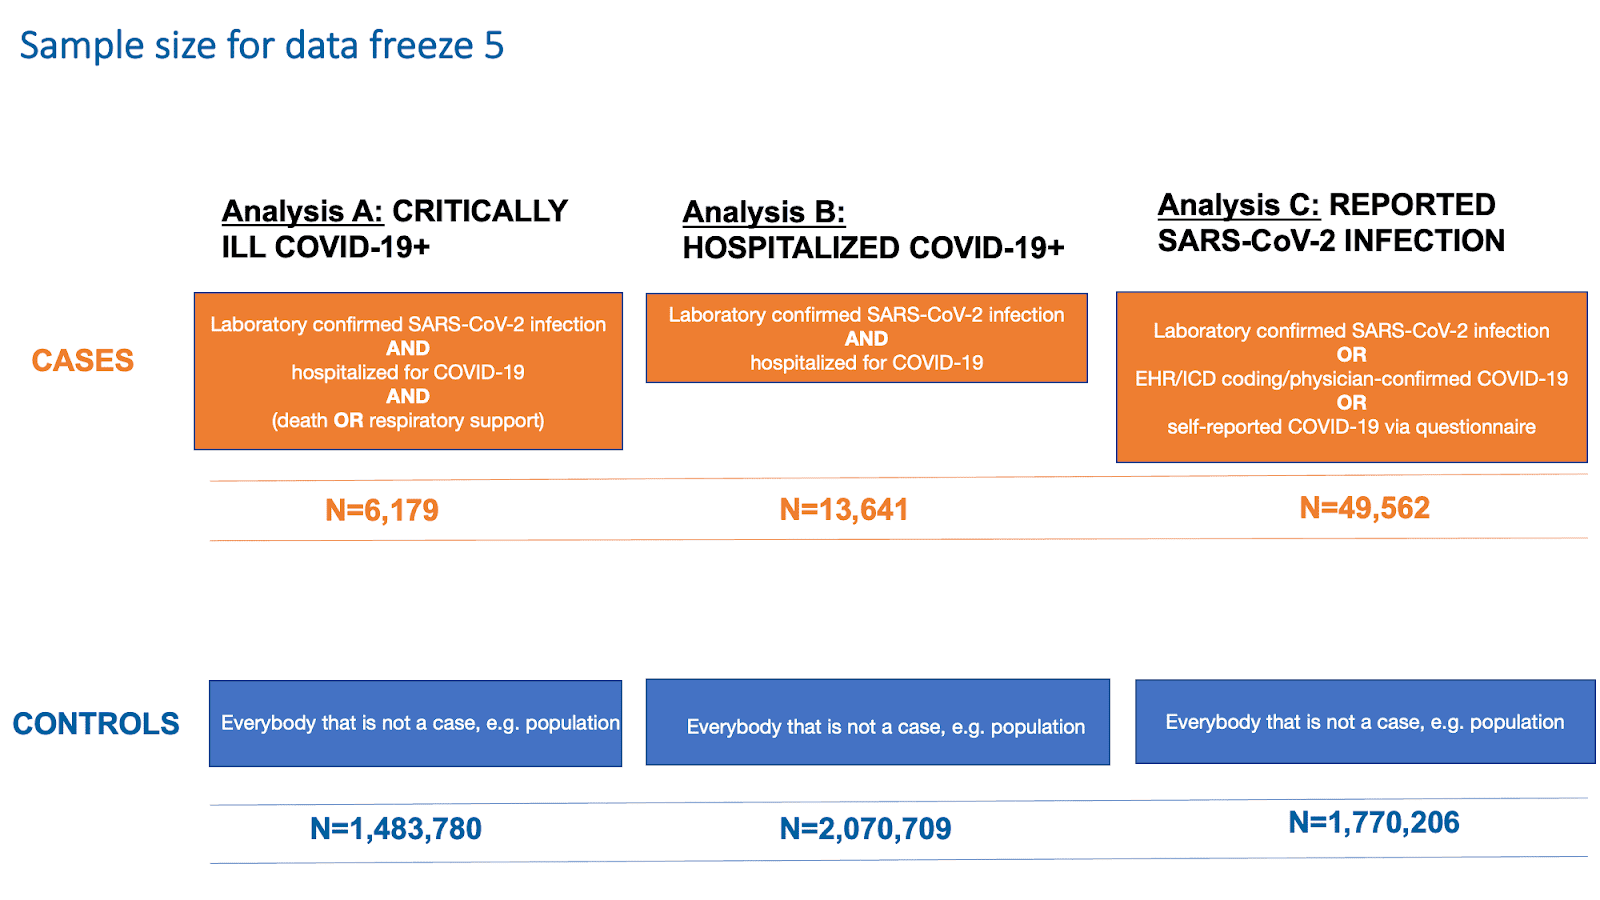 Figure 2: Definition of cases and controls for each of the analysis in data freeze 5.